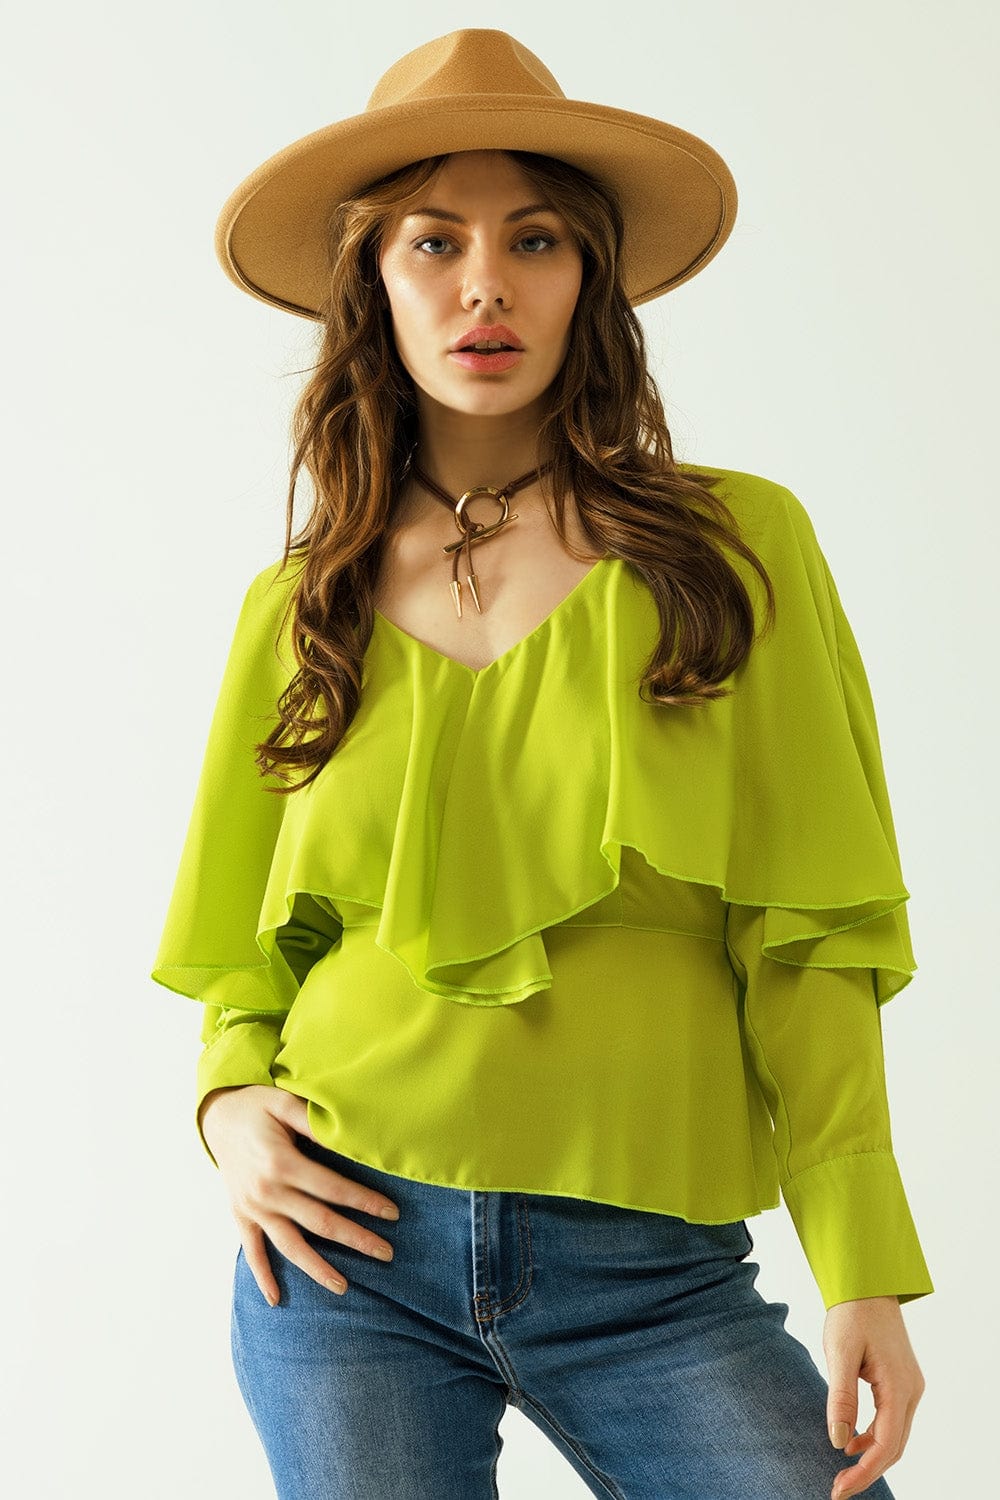 Q2 Women's Blouse Green Long Sleeve Top With A Ruffle Detail And Bare Back